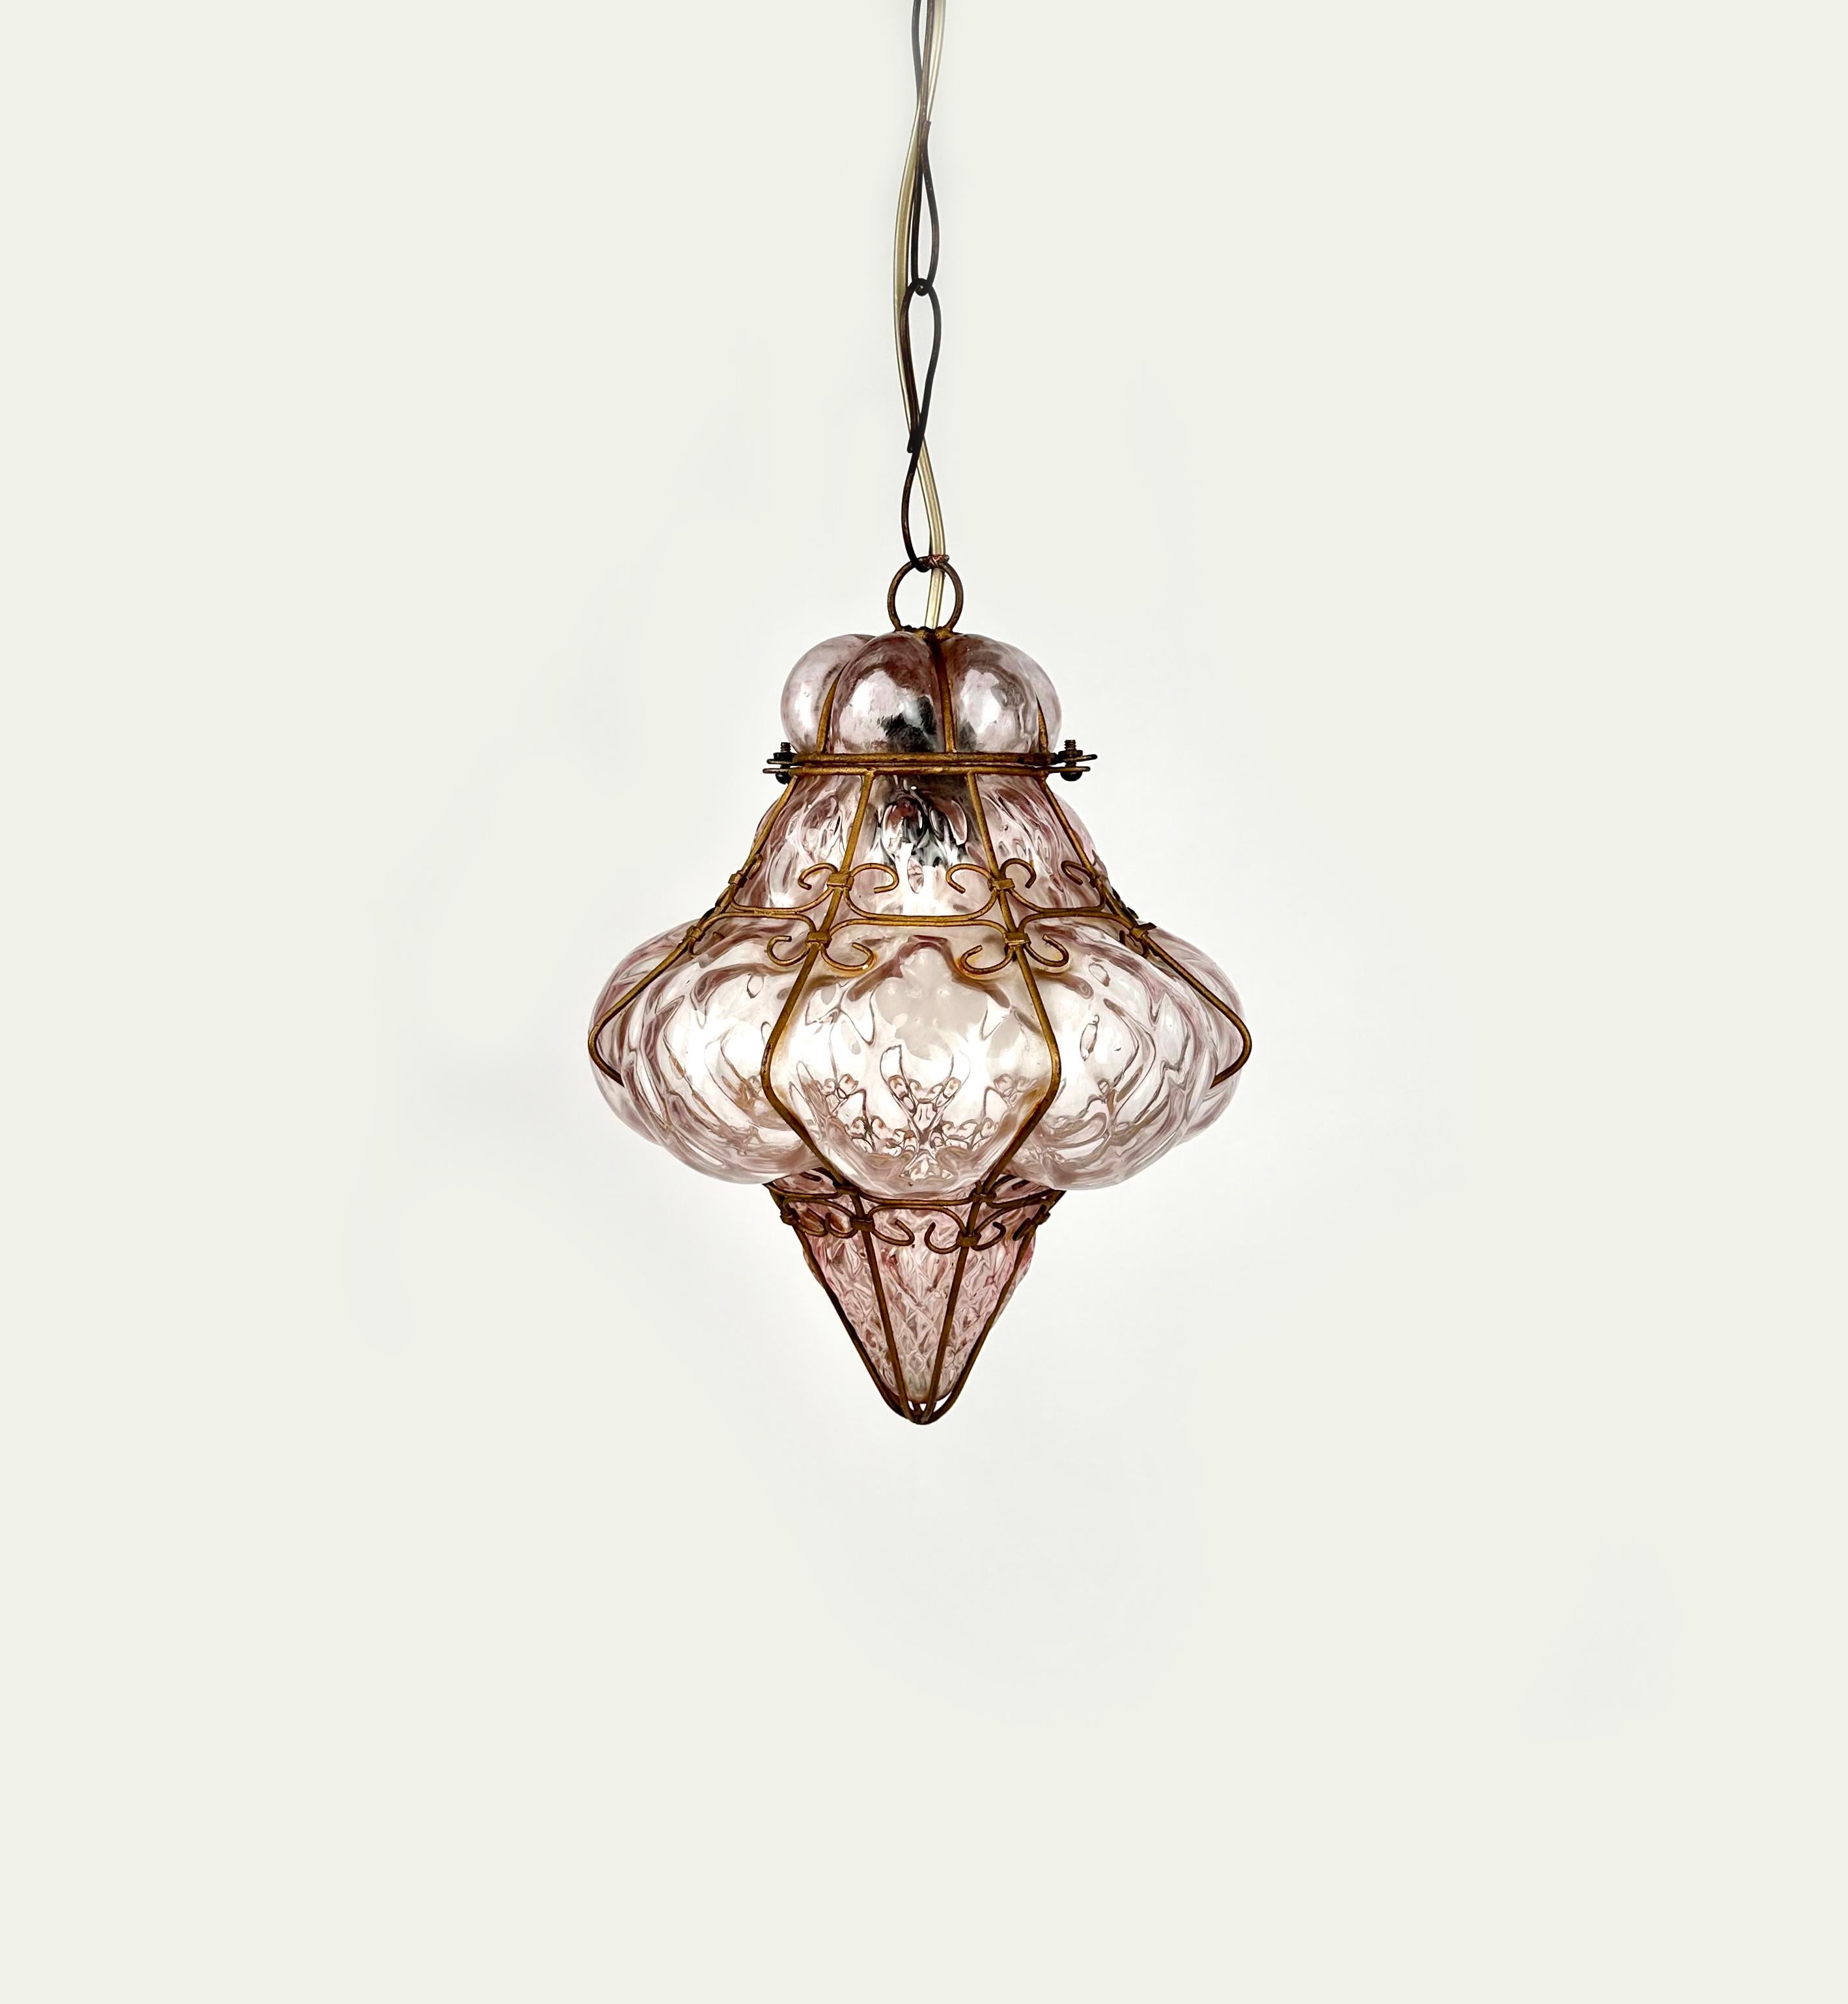 Midcentury Handblown Murano Pink Glass Pendant Light by Seguso, Italy, 1940s In Good Condition For Sale In Rome, IT